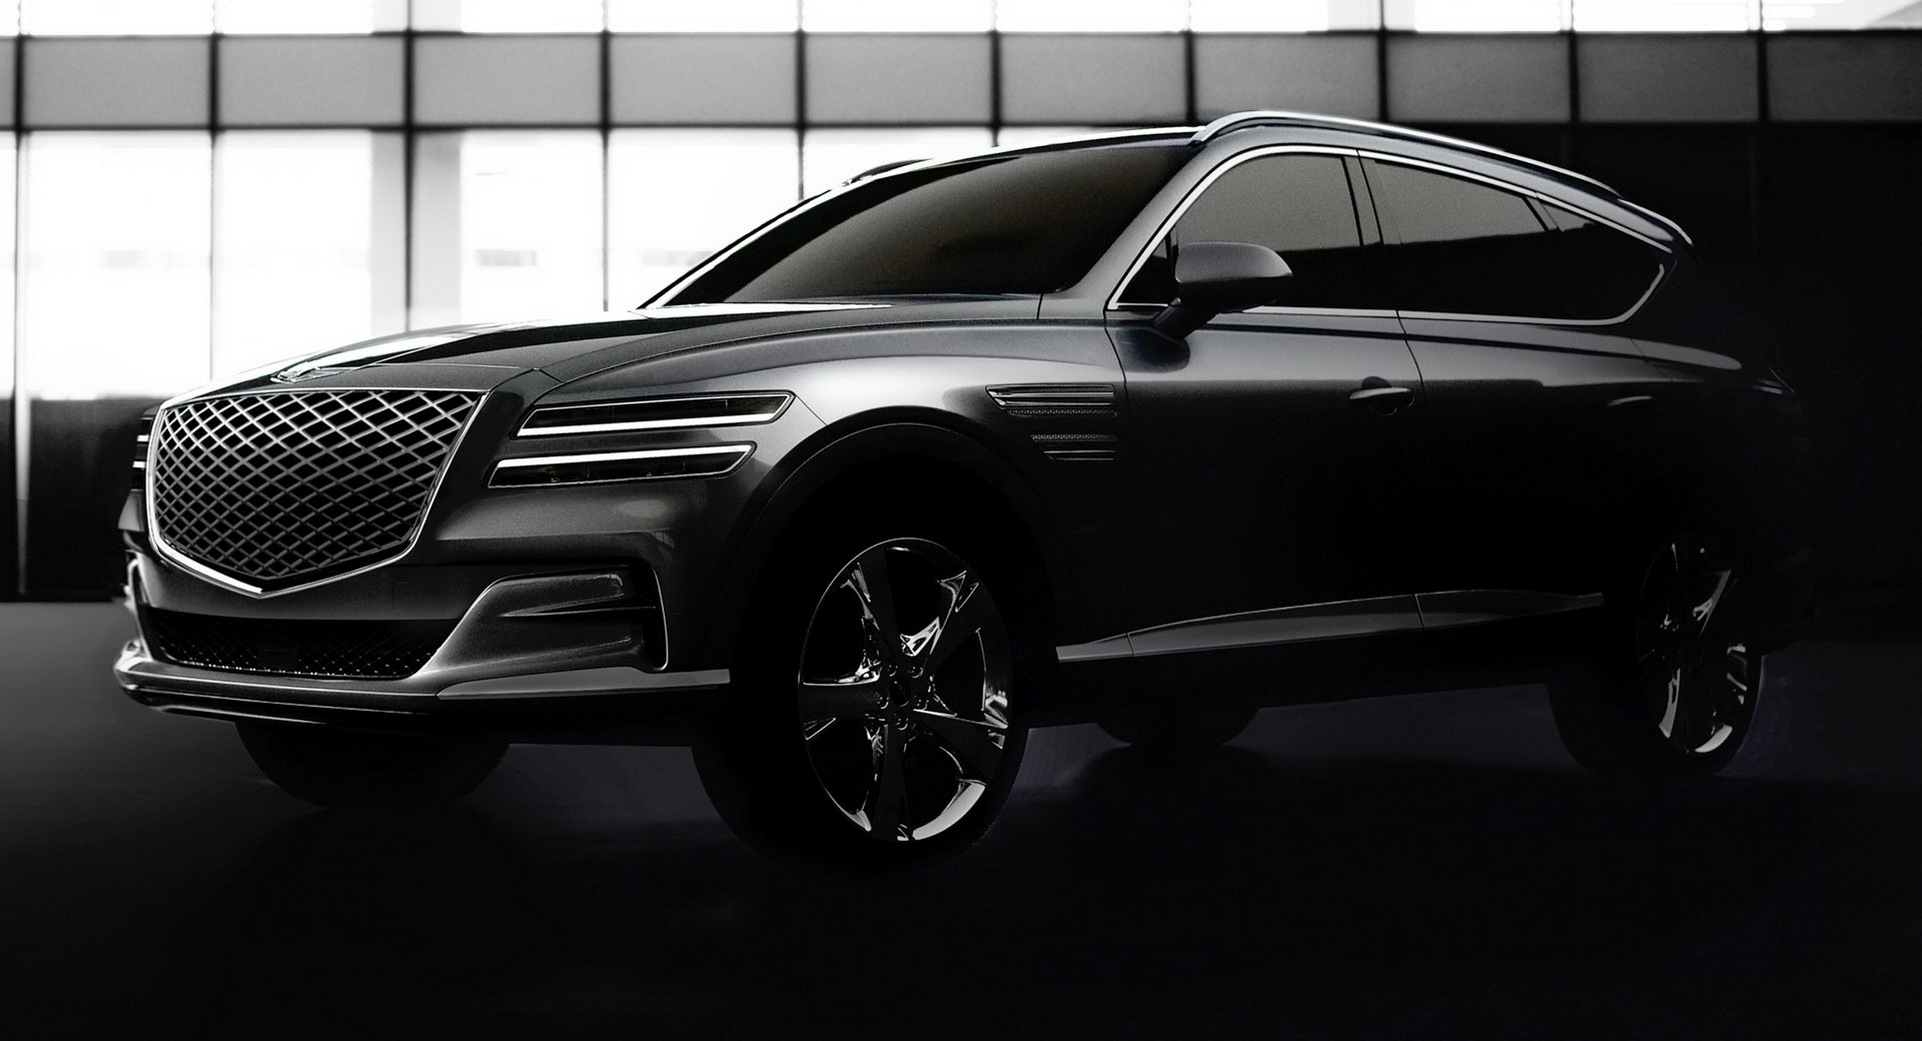 Genesis GV80: First Official Photos And Details Of Luxury SUV